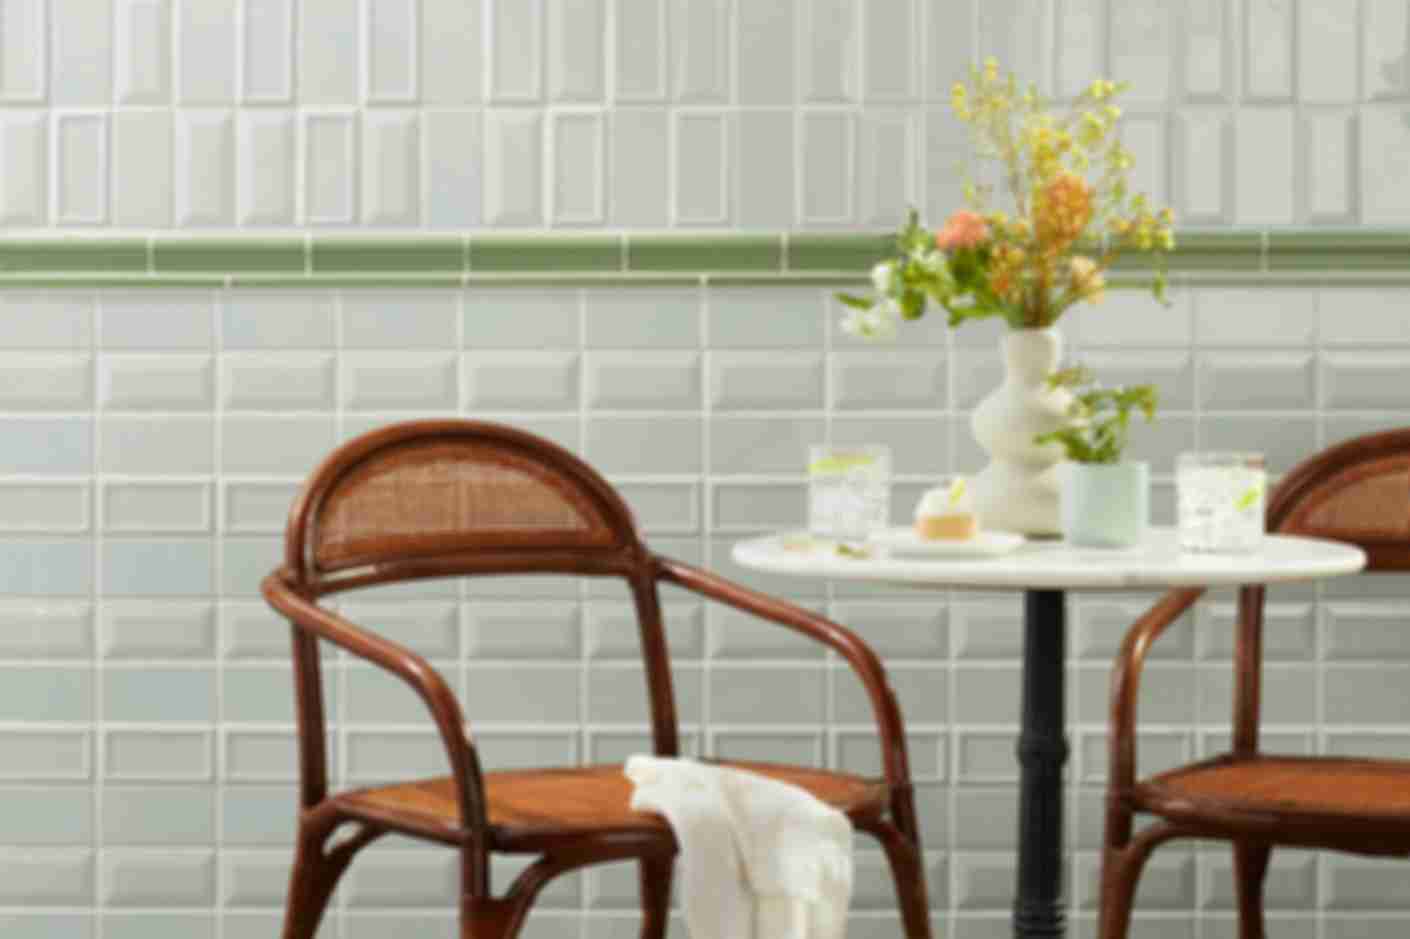 Green kitchen wall tile in vertical and horizontal stack with table and chairs.